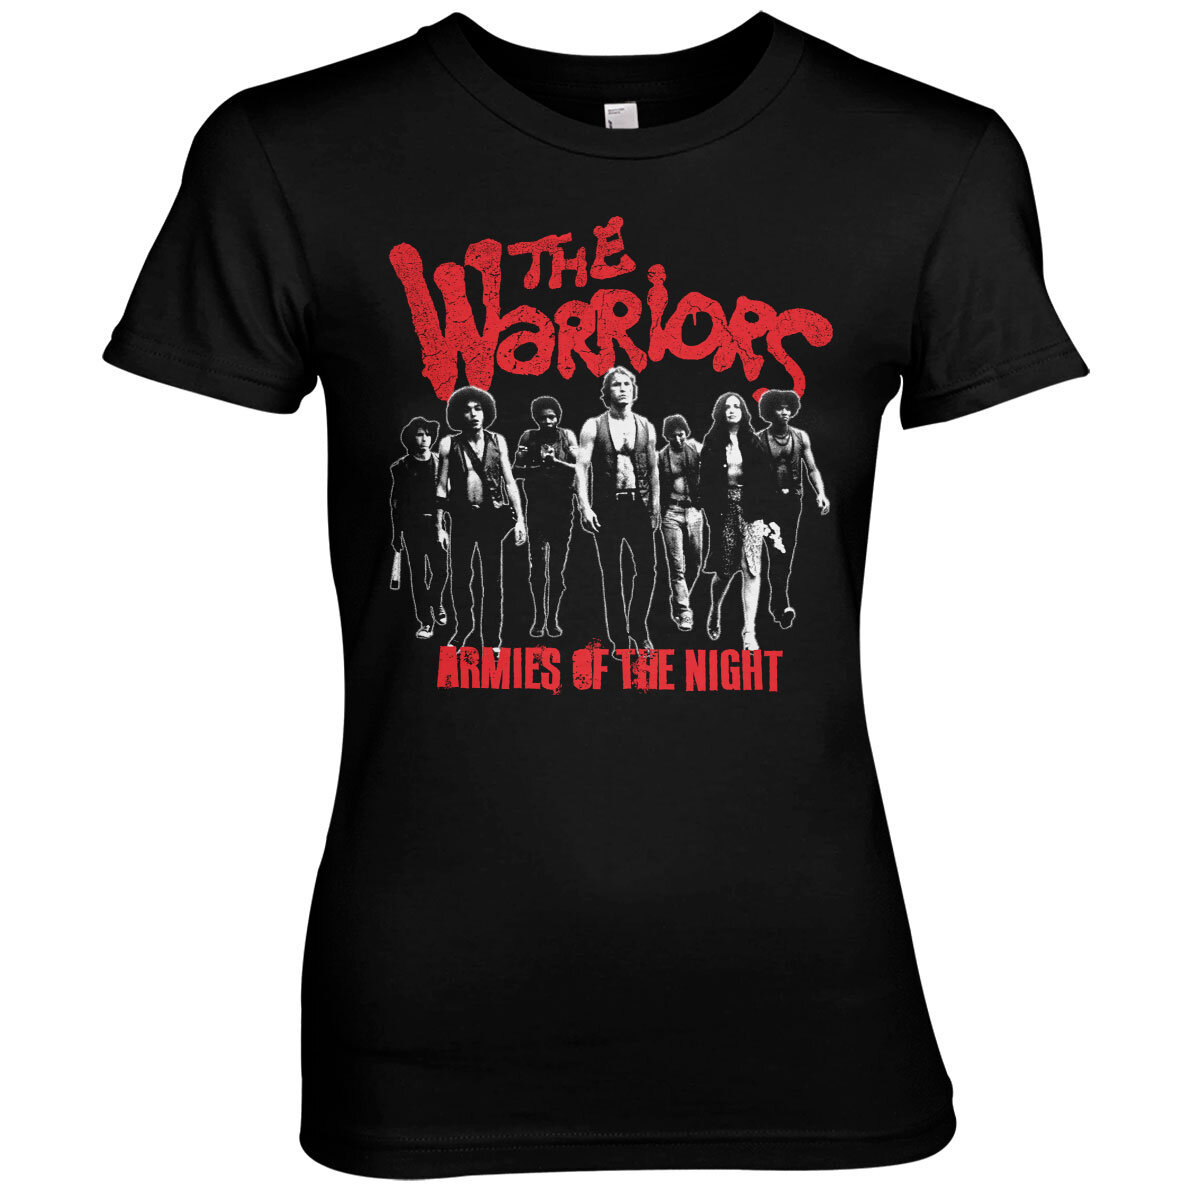 The Warriors - Armies Of The Night Girly Tee